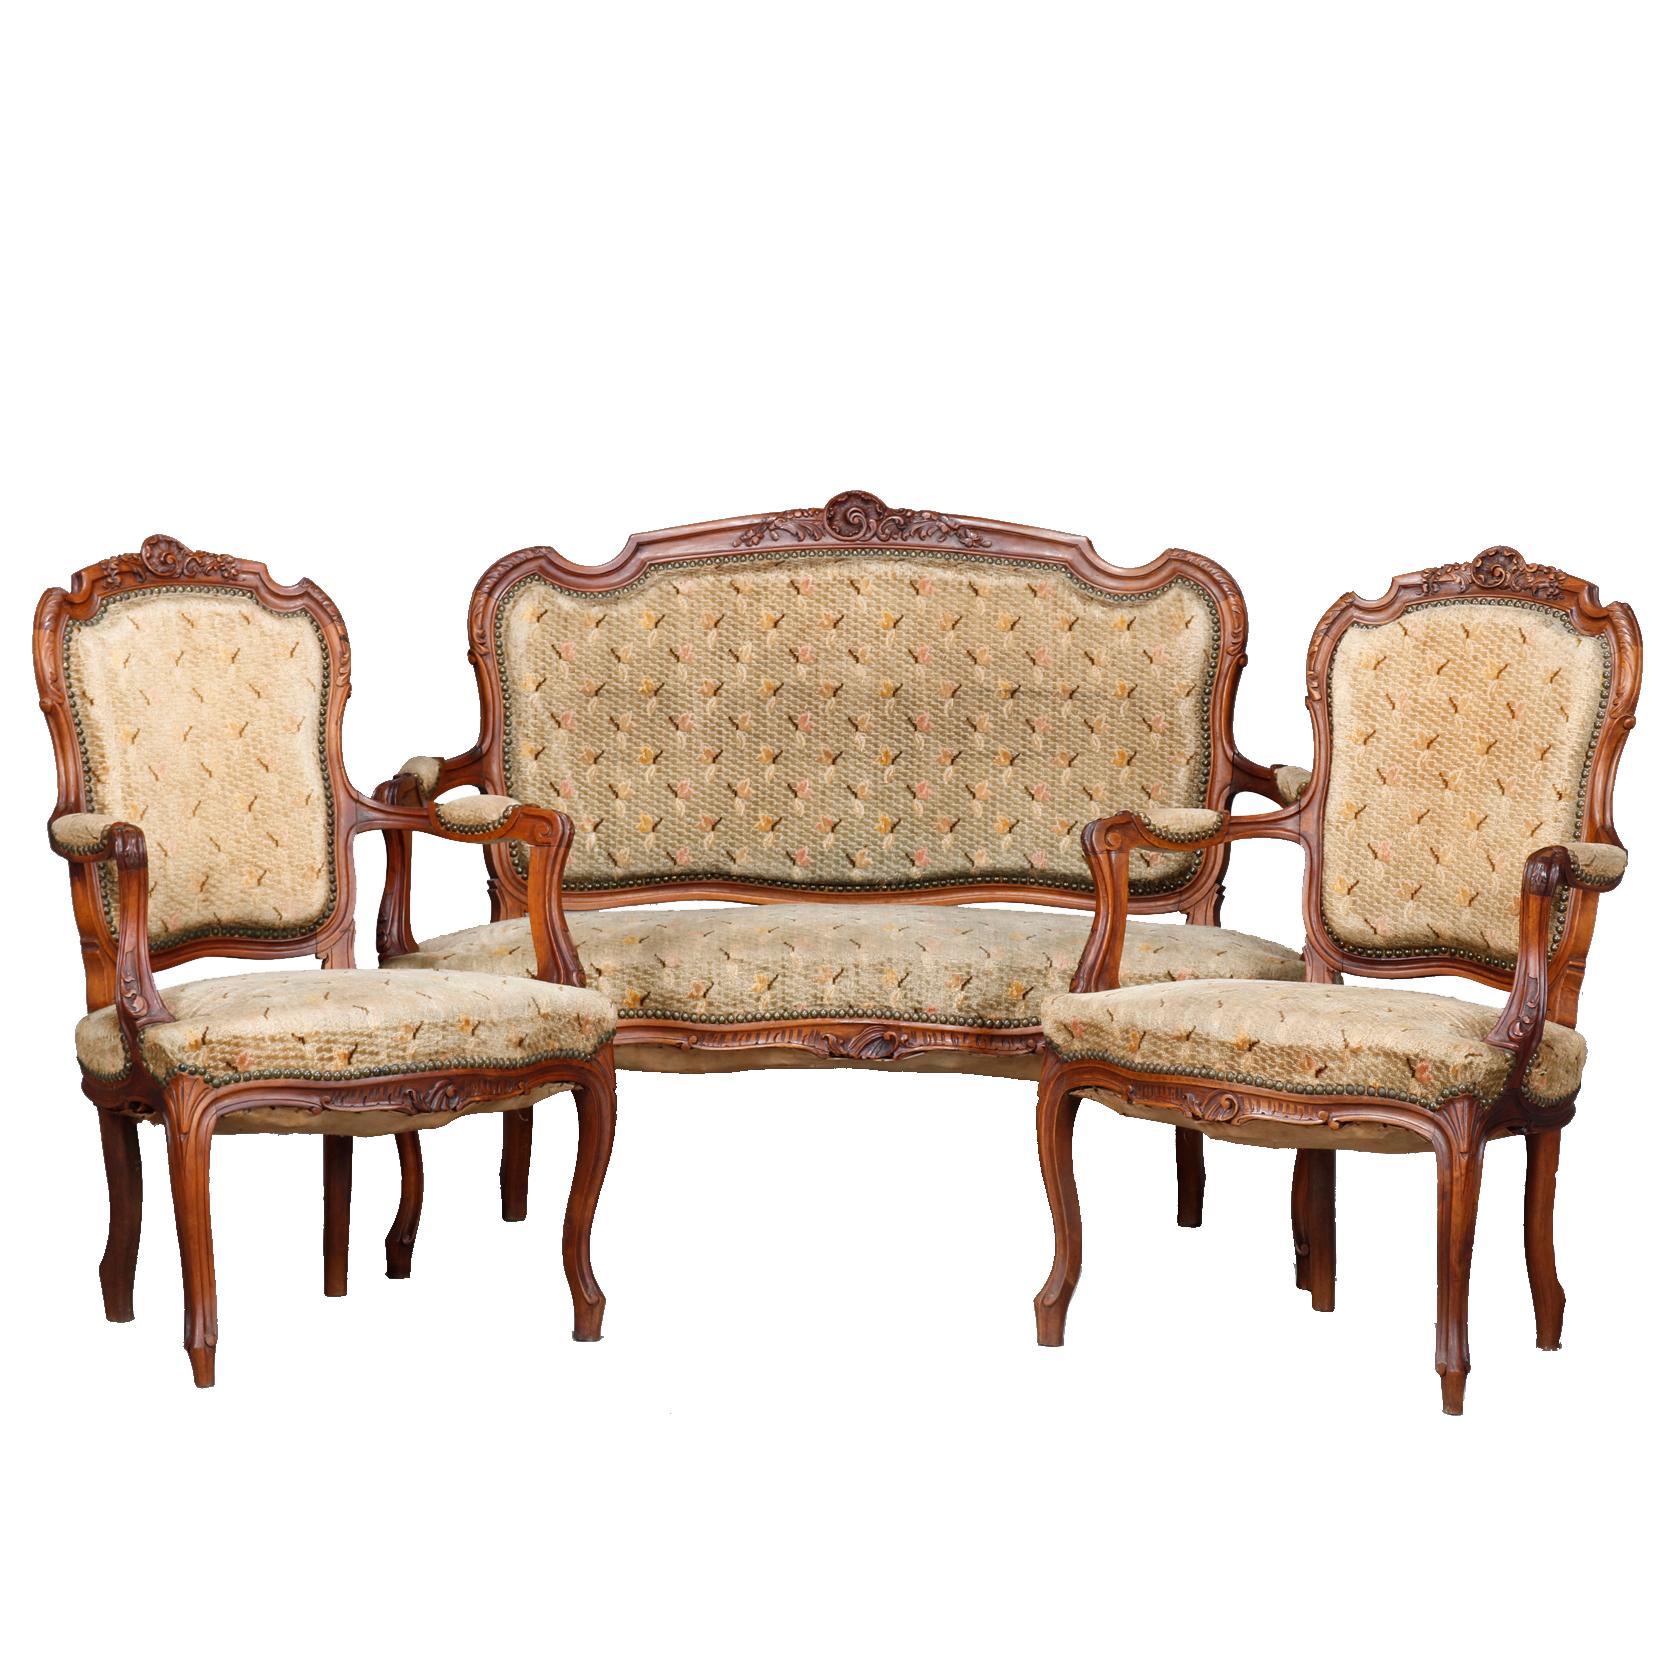 An antique French Louis XVI parlor set offers walnut construction with carved foliate crests, scroll arms and raised on cabriole les terminating in scroll feet; upholstered backs, seats and arms; set includes settee with two arm chairs, circa